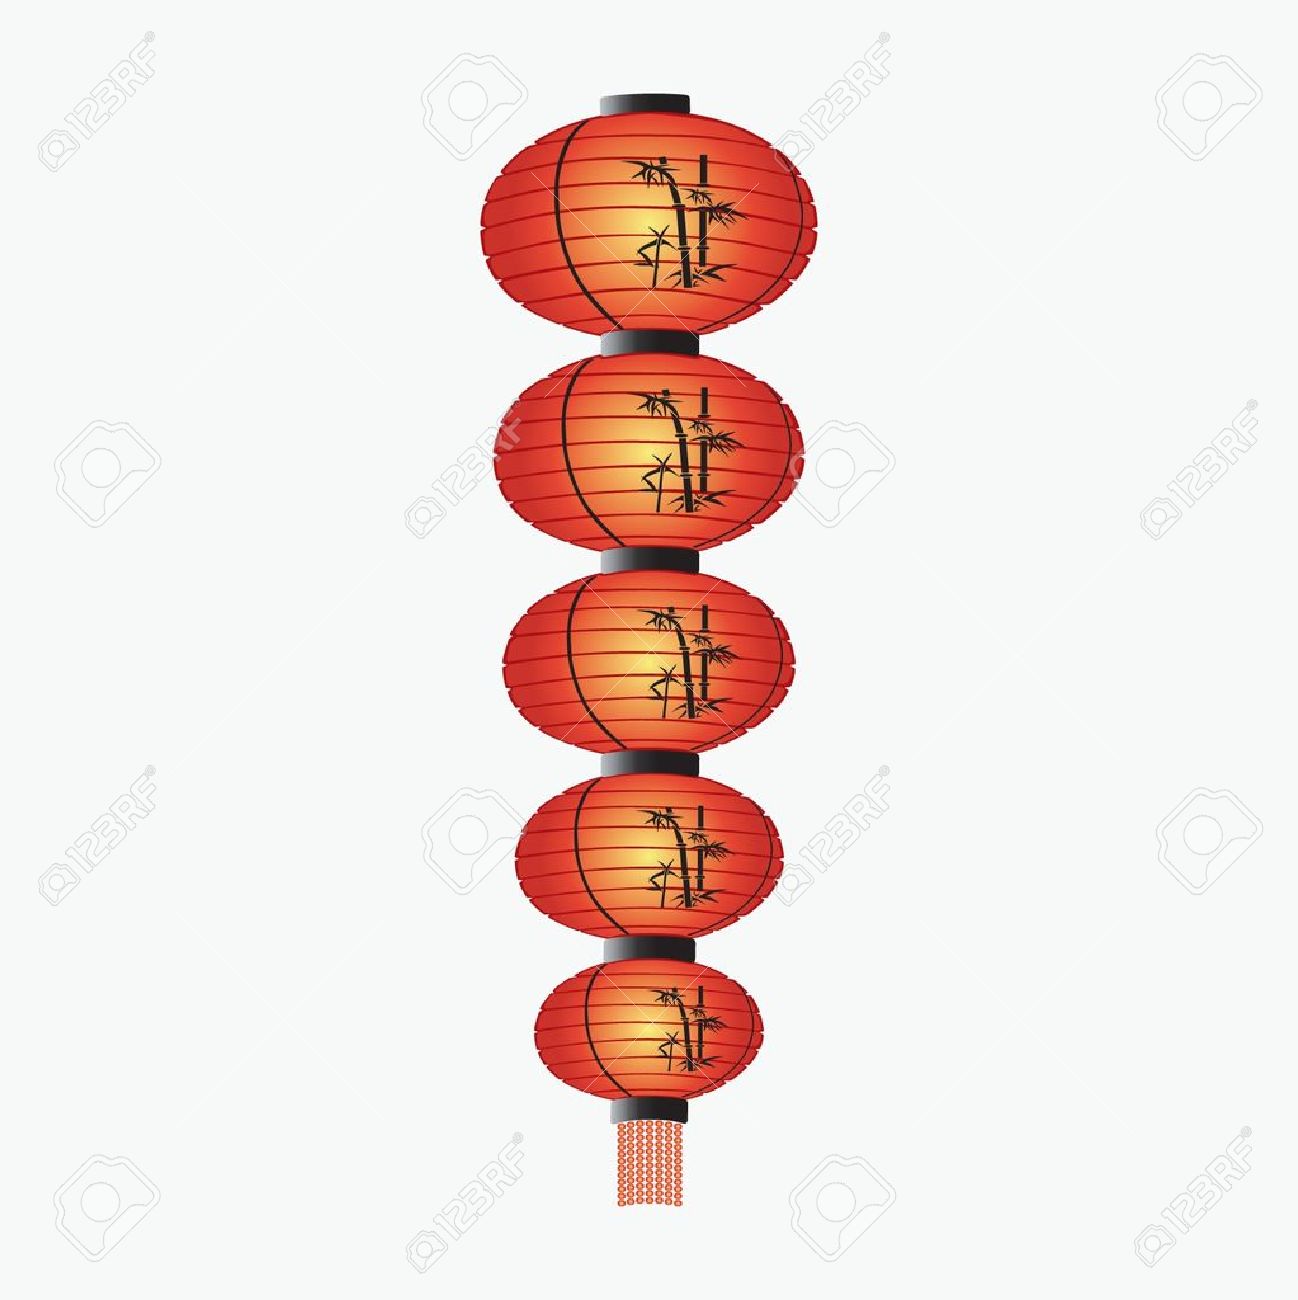 Red lantern free collection. China clipart illustration